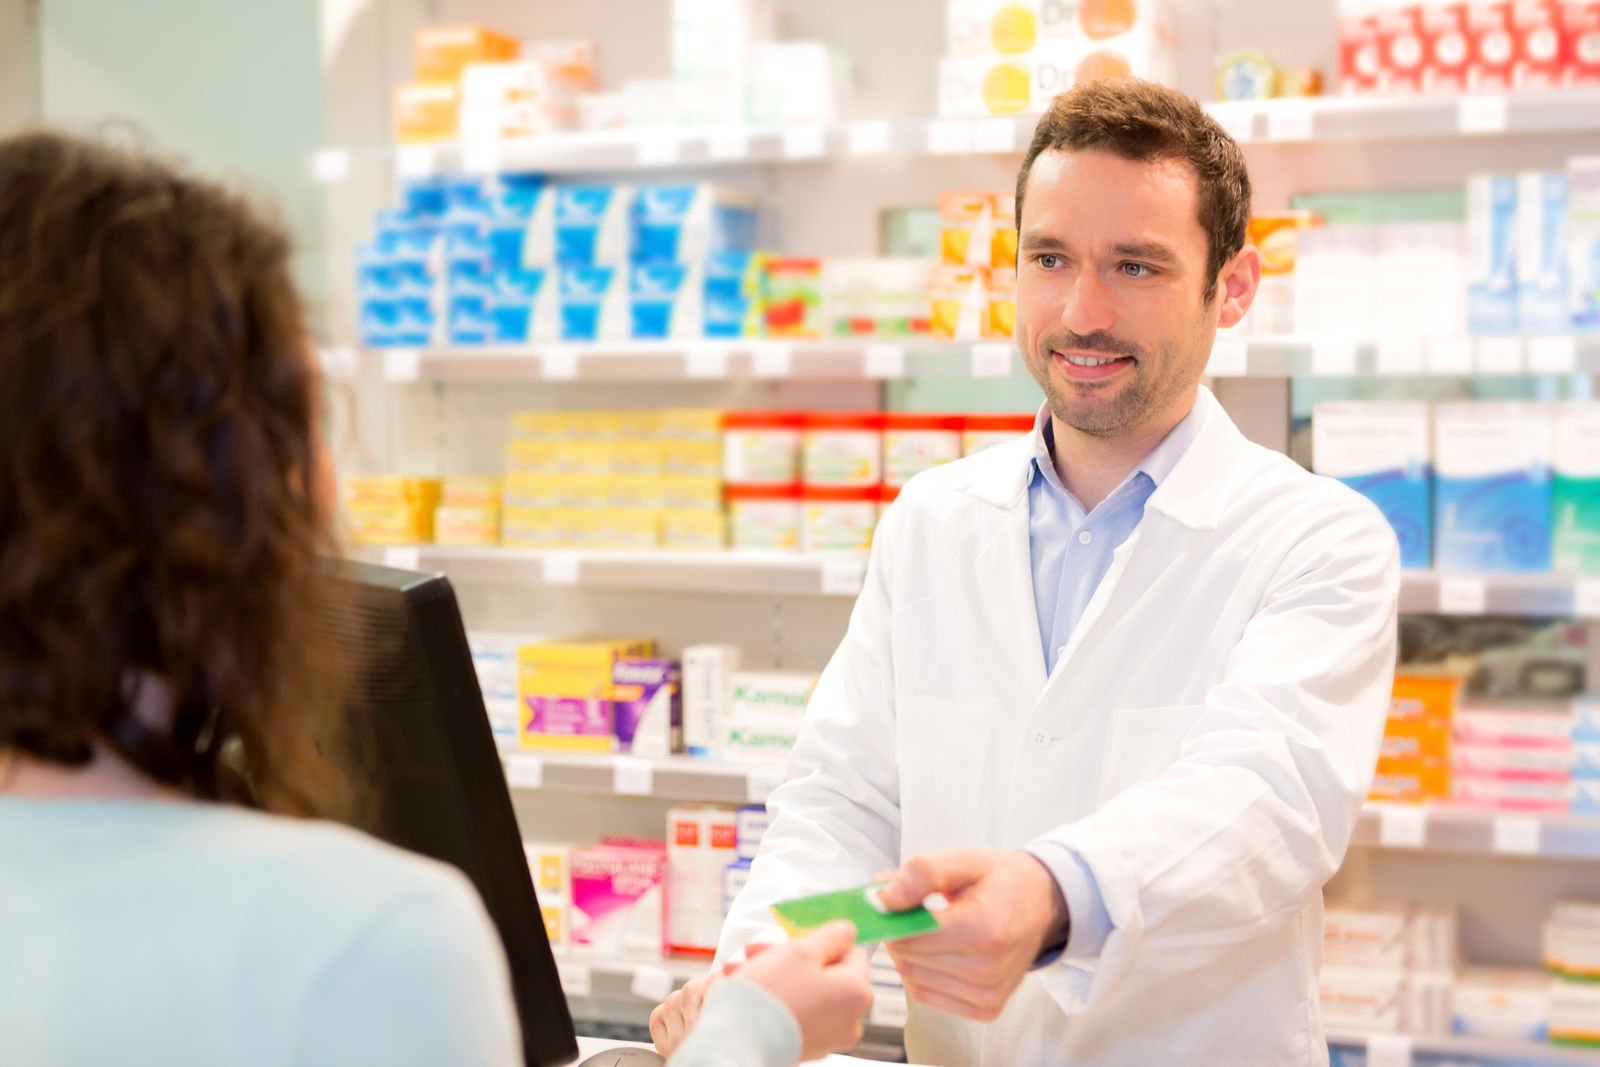 Compare Pharmacist Car Insurance Rates [2023]